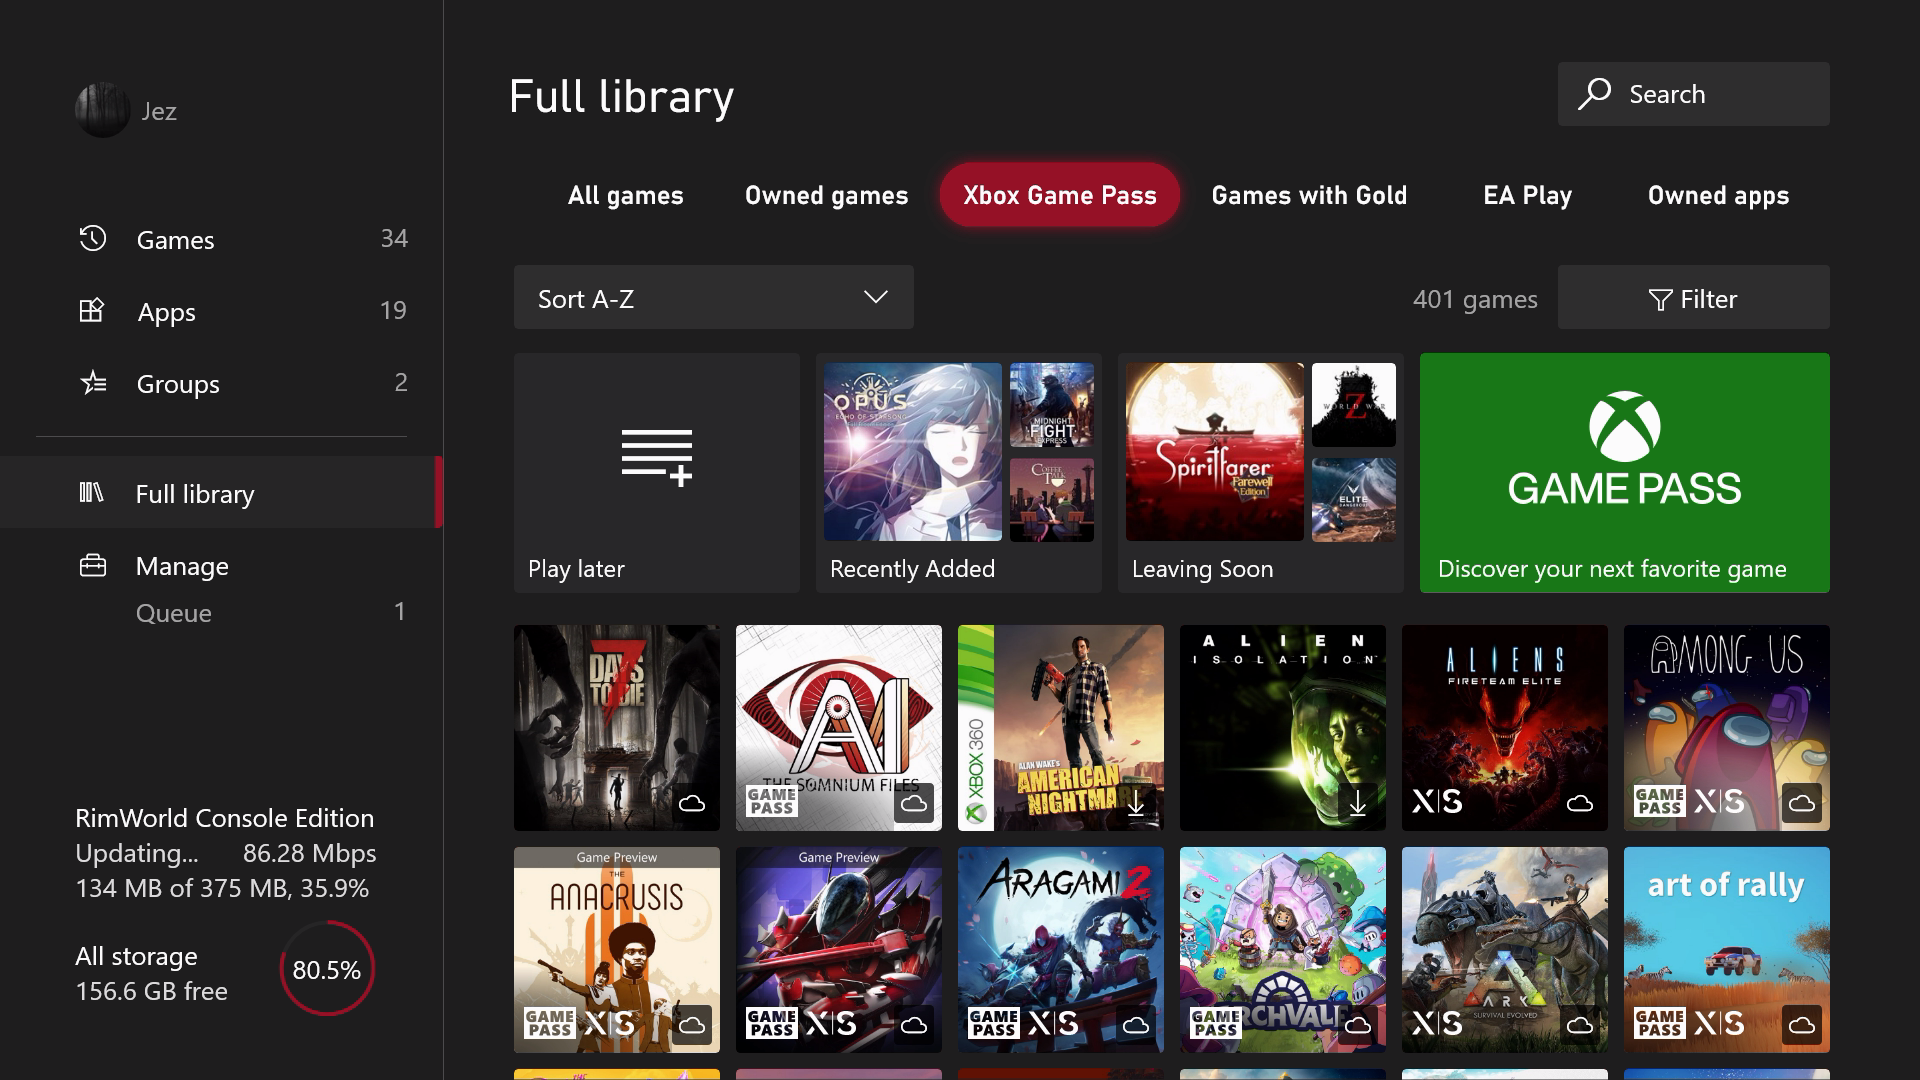 Complete library of Xbox games and apps, redesigned as of August 2022